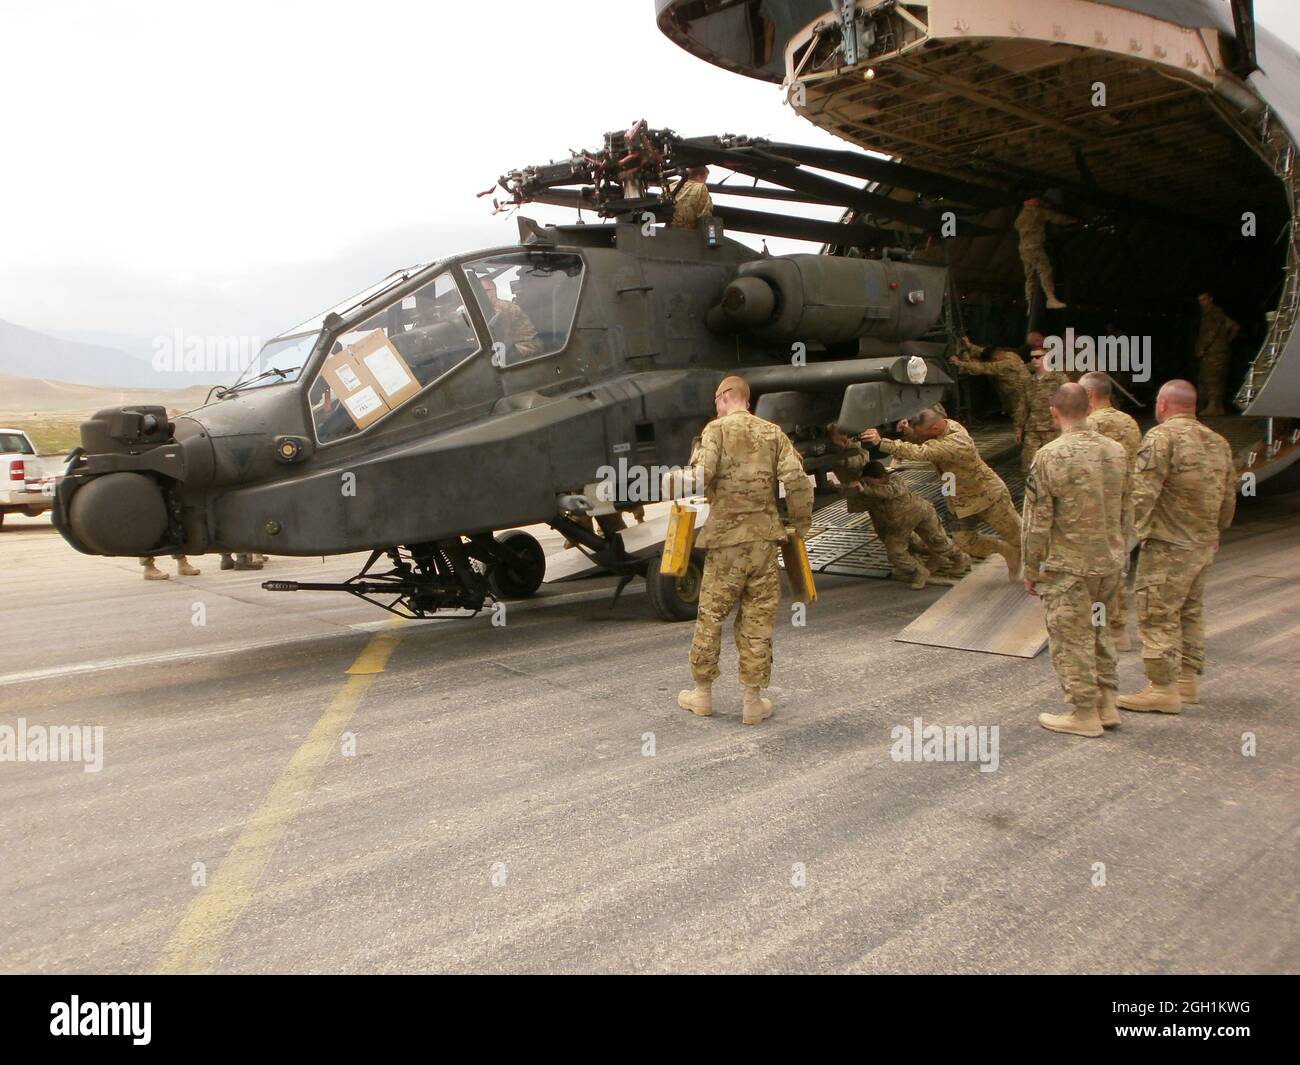 Soldiers from 12th Combat Aviation Brigade, out of Ansbach, Germany, offload an AH-64 Apache helicopter from a C5 Galaxy cargo aircraft in Mazar e Sharif, Afghanistan, on April  28,  2012.  The brigade is  deploying to Afghanistan's Regional Command North in support of Operation Enduring Freedom.  (Photo by Maj. John C. Crotzer) Stock Photo